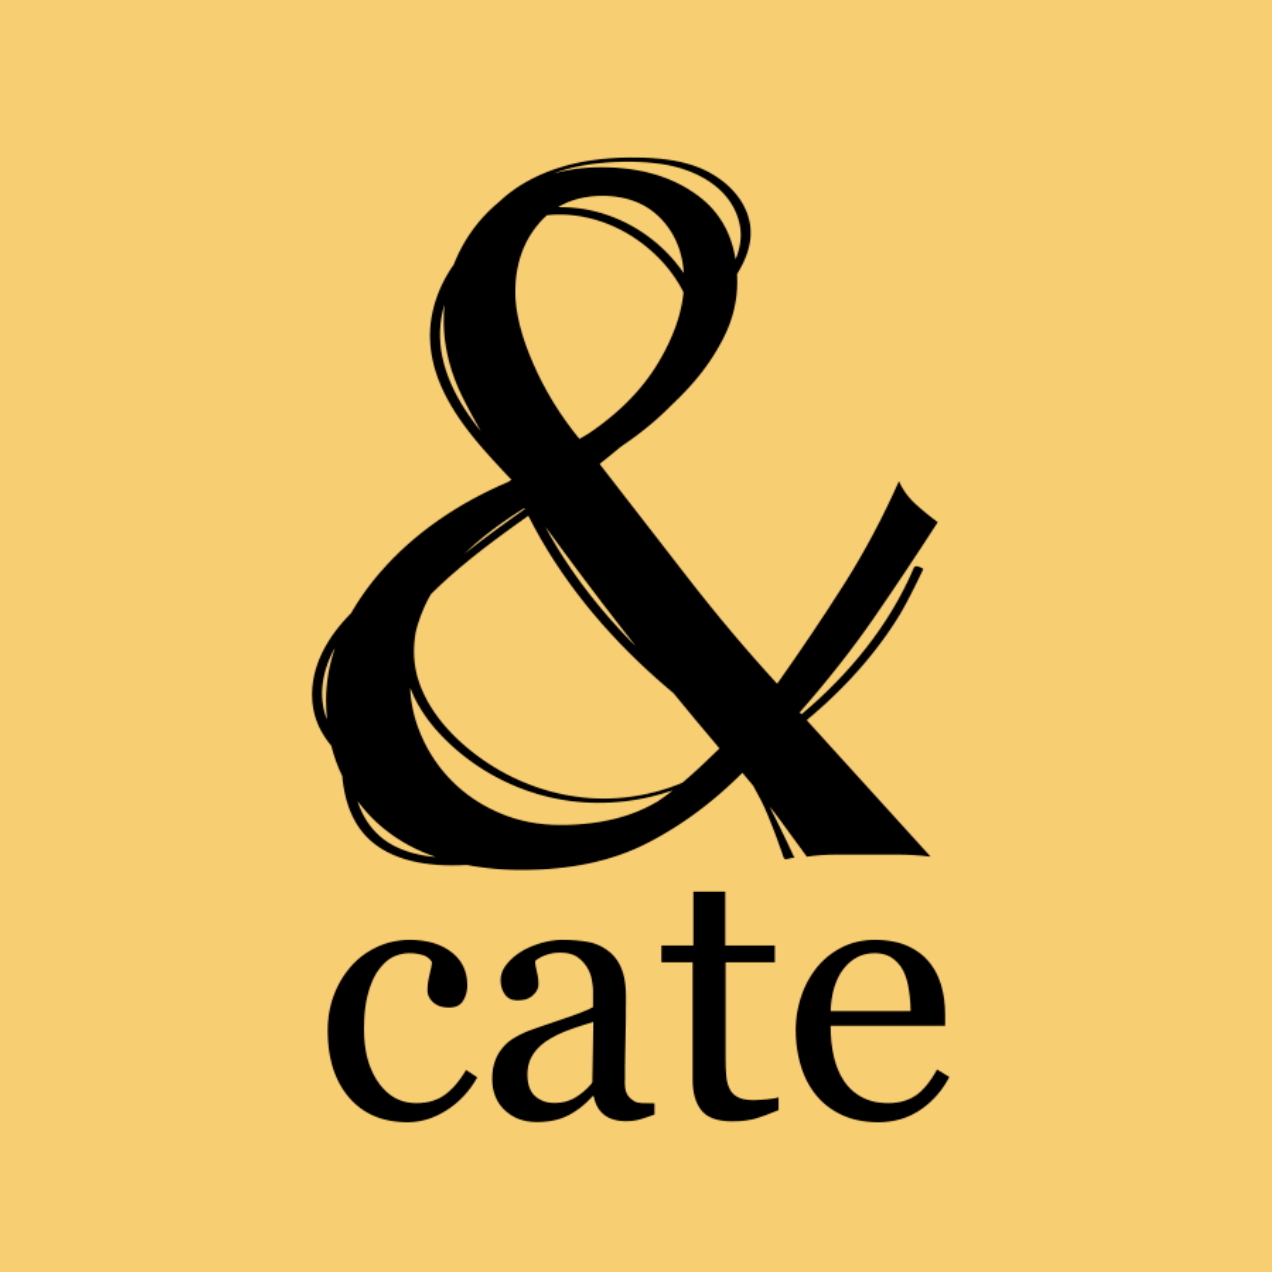 Placeholder Cate logo, until project is completed